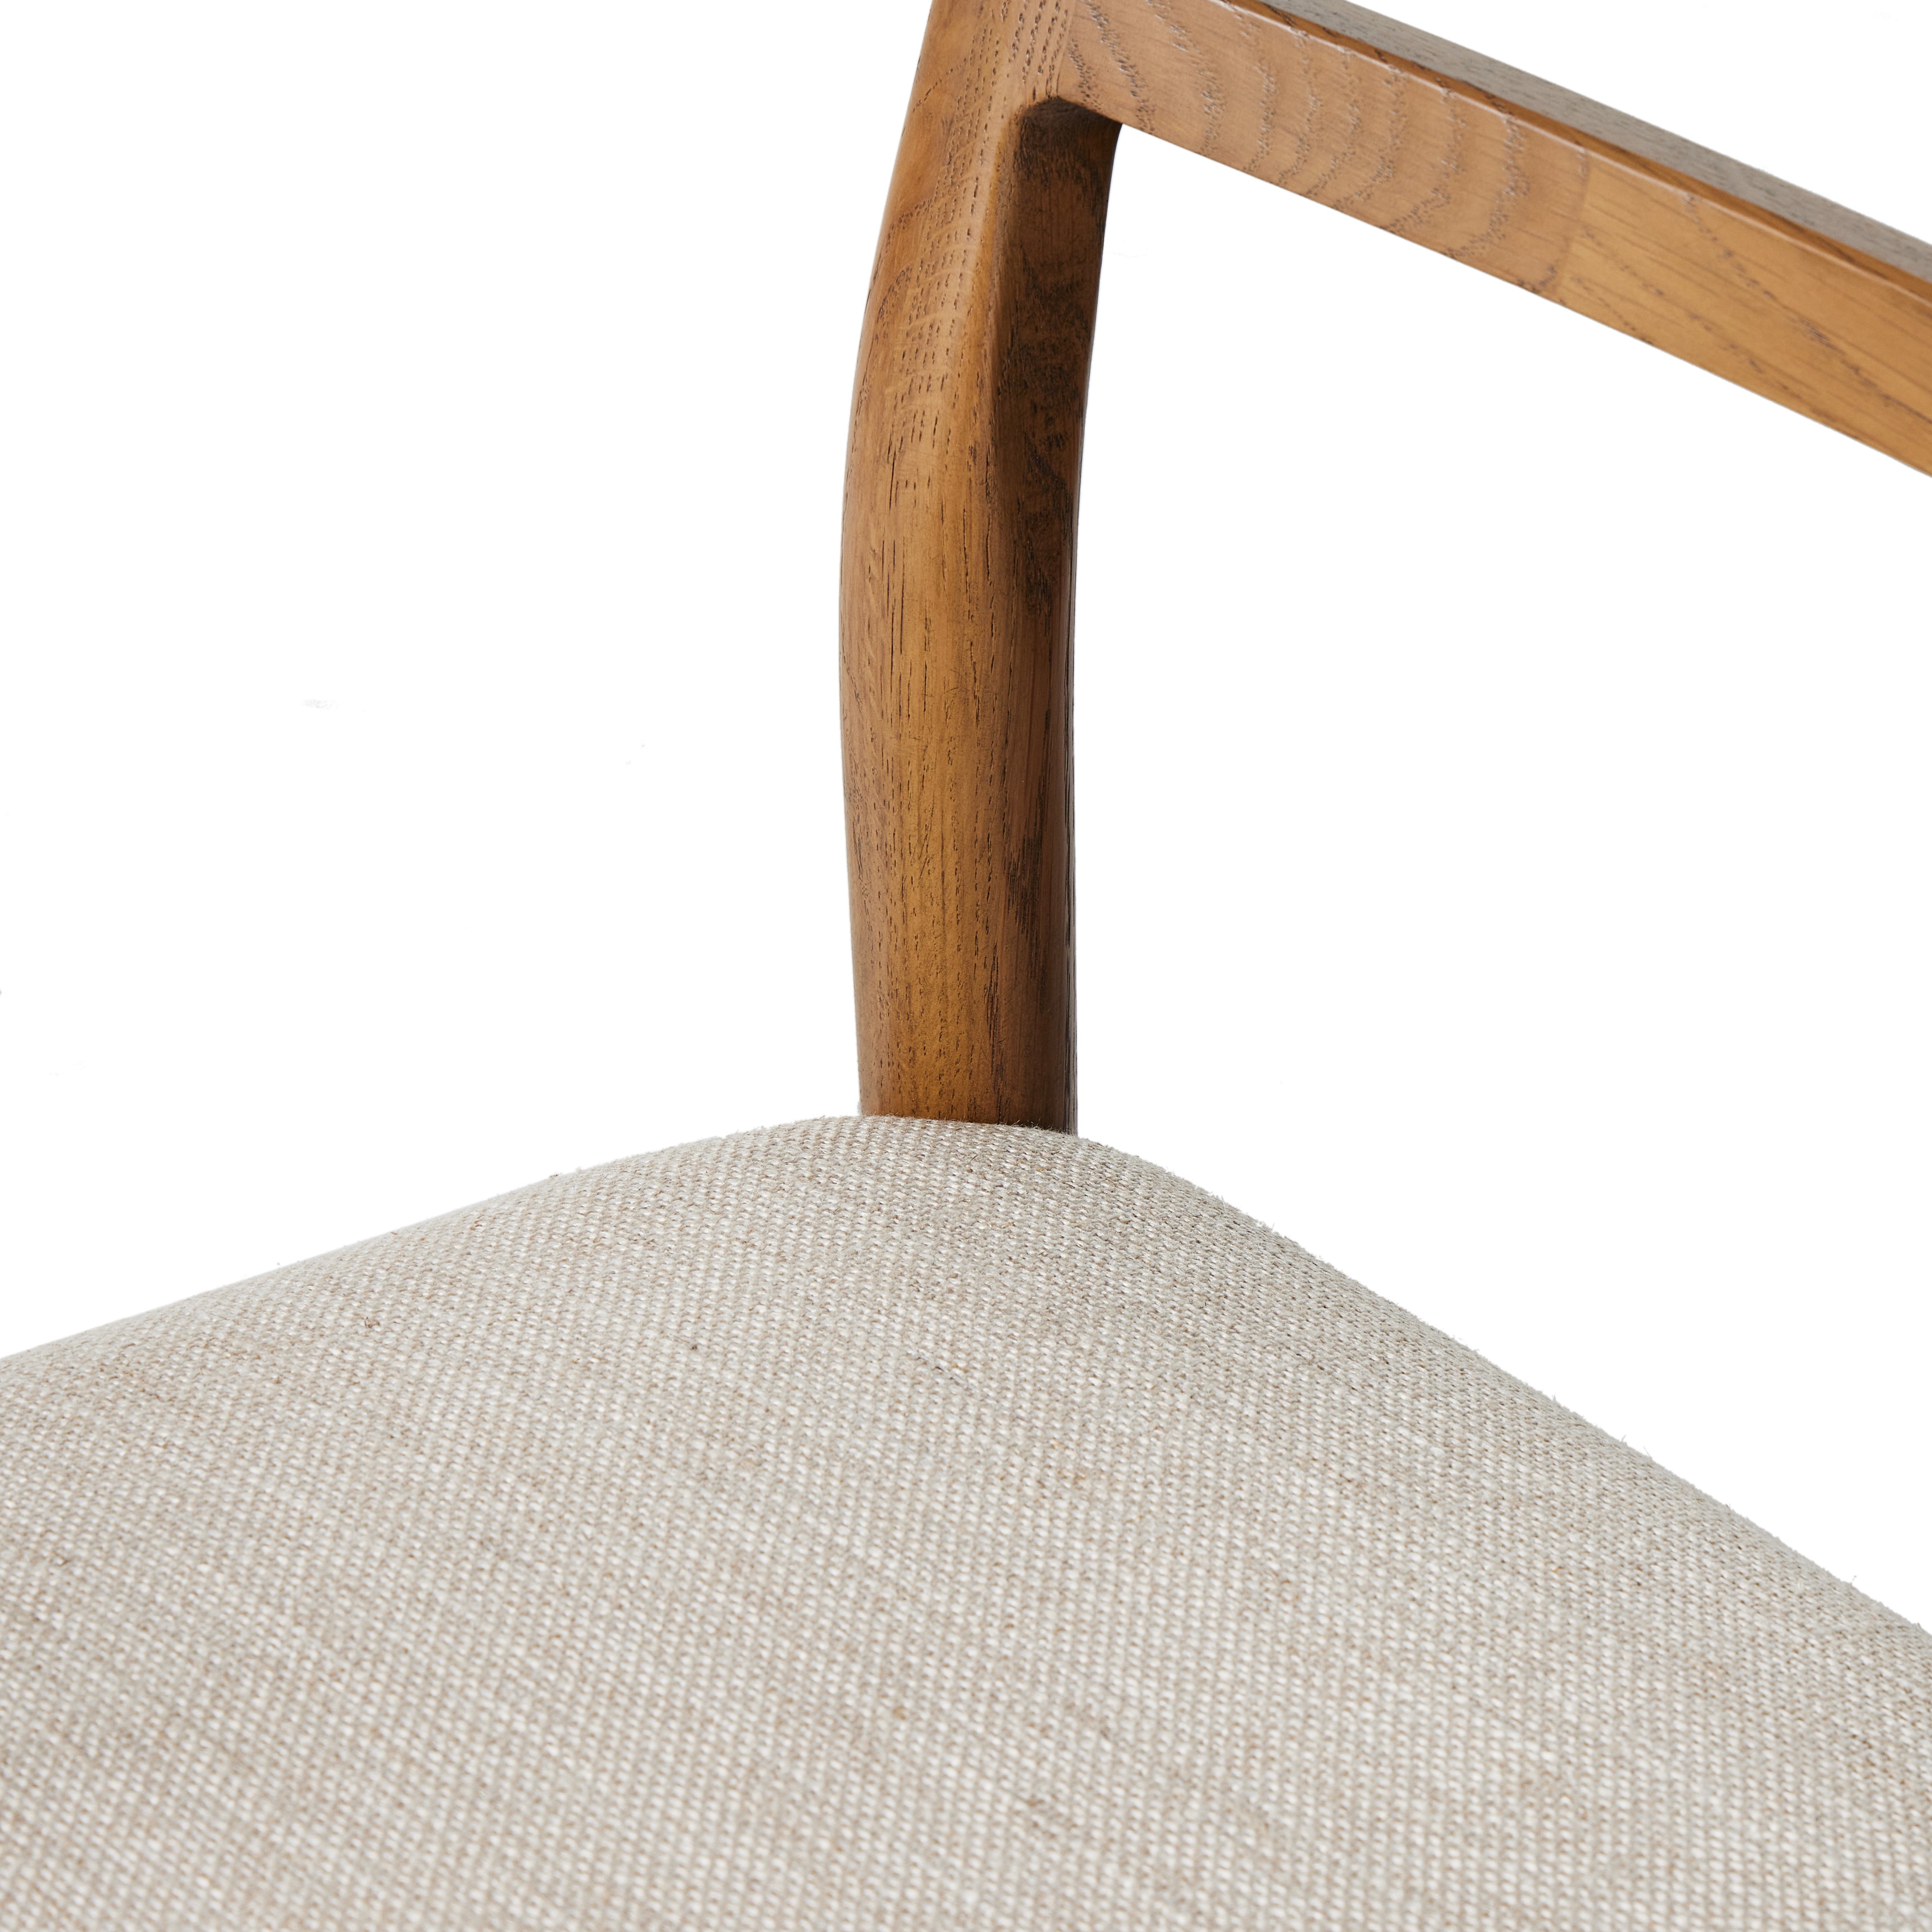 Textured materials redefine the classic ladderback chair, with a smoked oak frame and a comfortable seat of cotton and linen. Amethyst Home provides interior design, new construction, custom furniture, and area rugs in the Laguna Beach metro area.